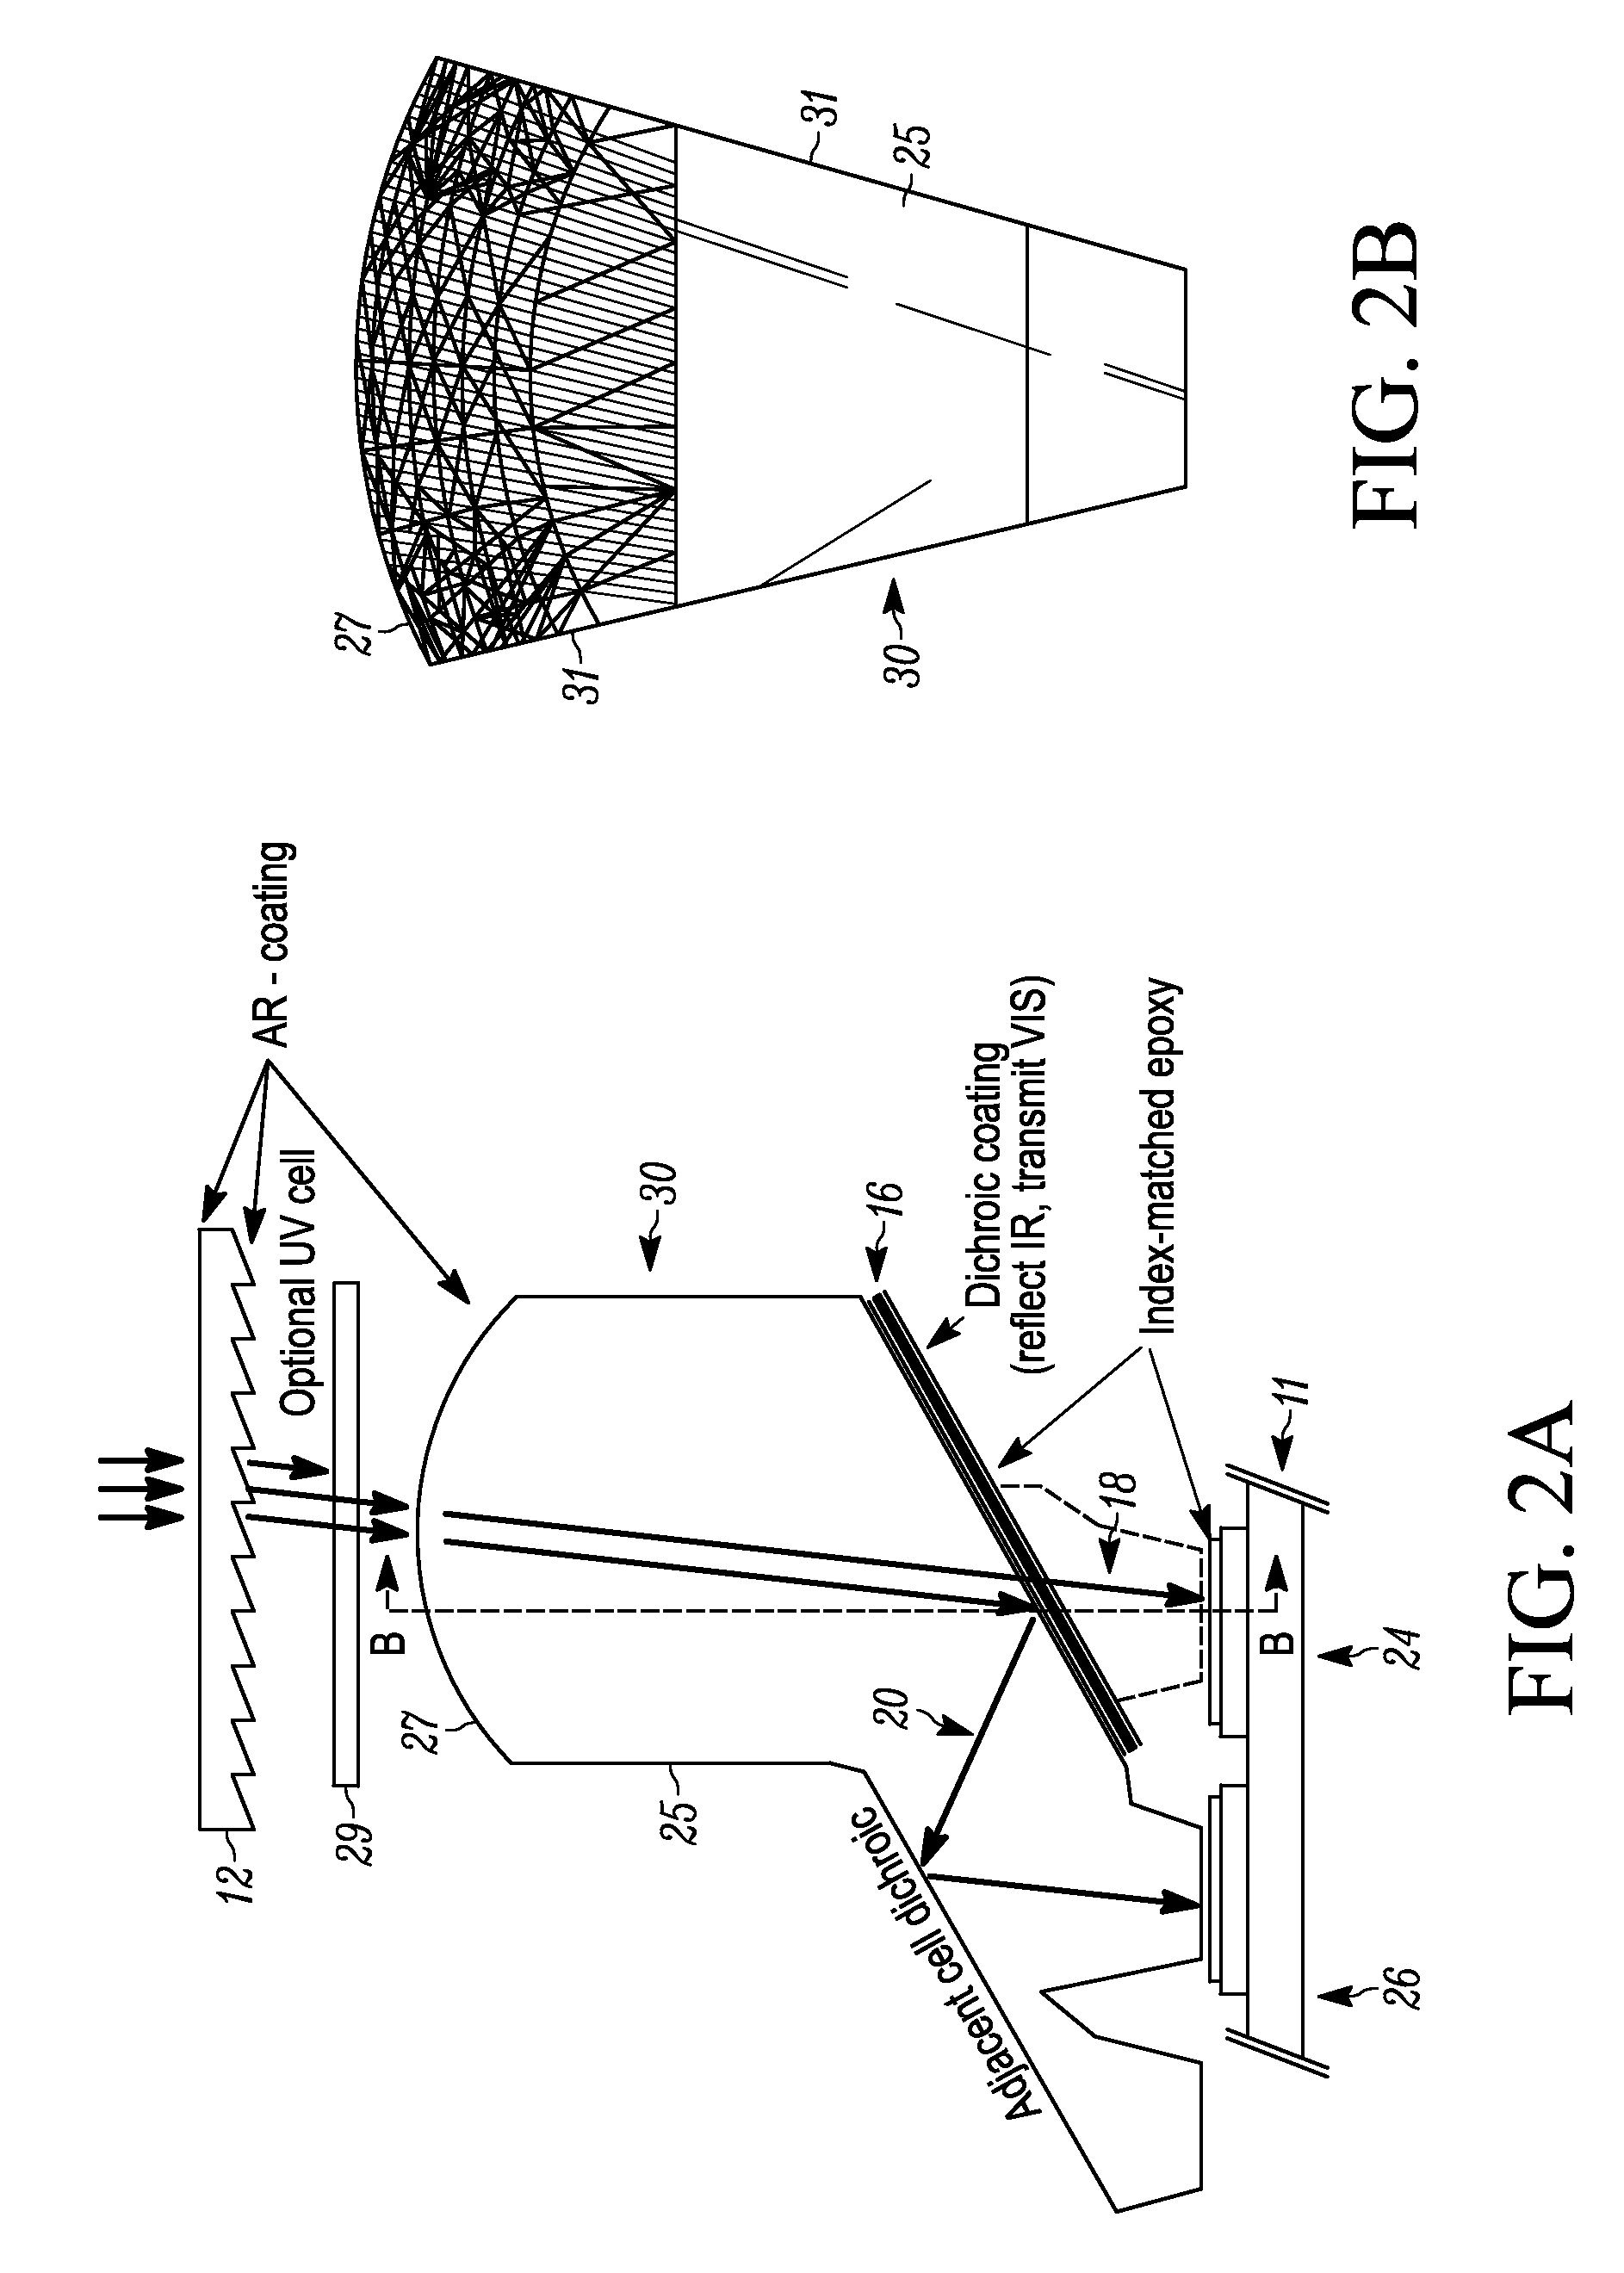 System and method for solar energy capture